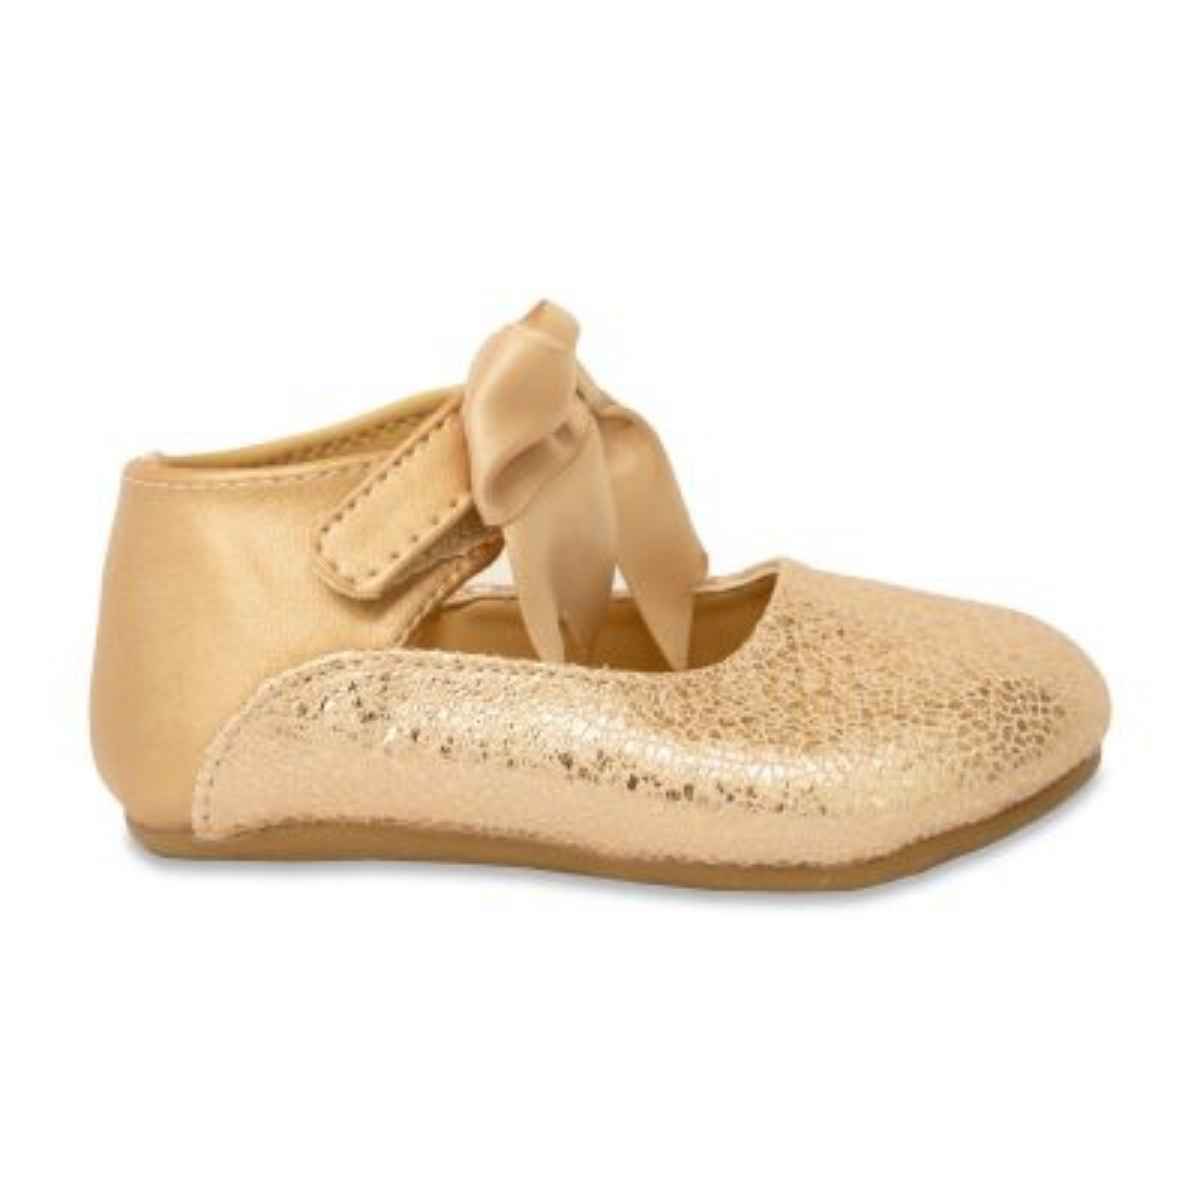 Chloe Toddler Rose Gold Dress Flats with Bow - Kids Shoe Box